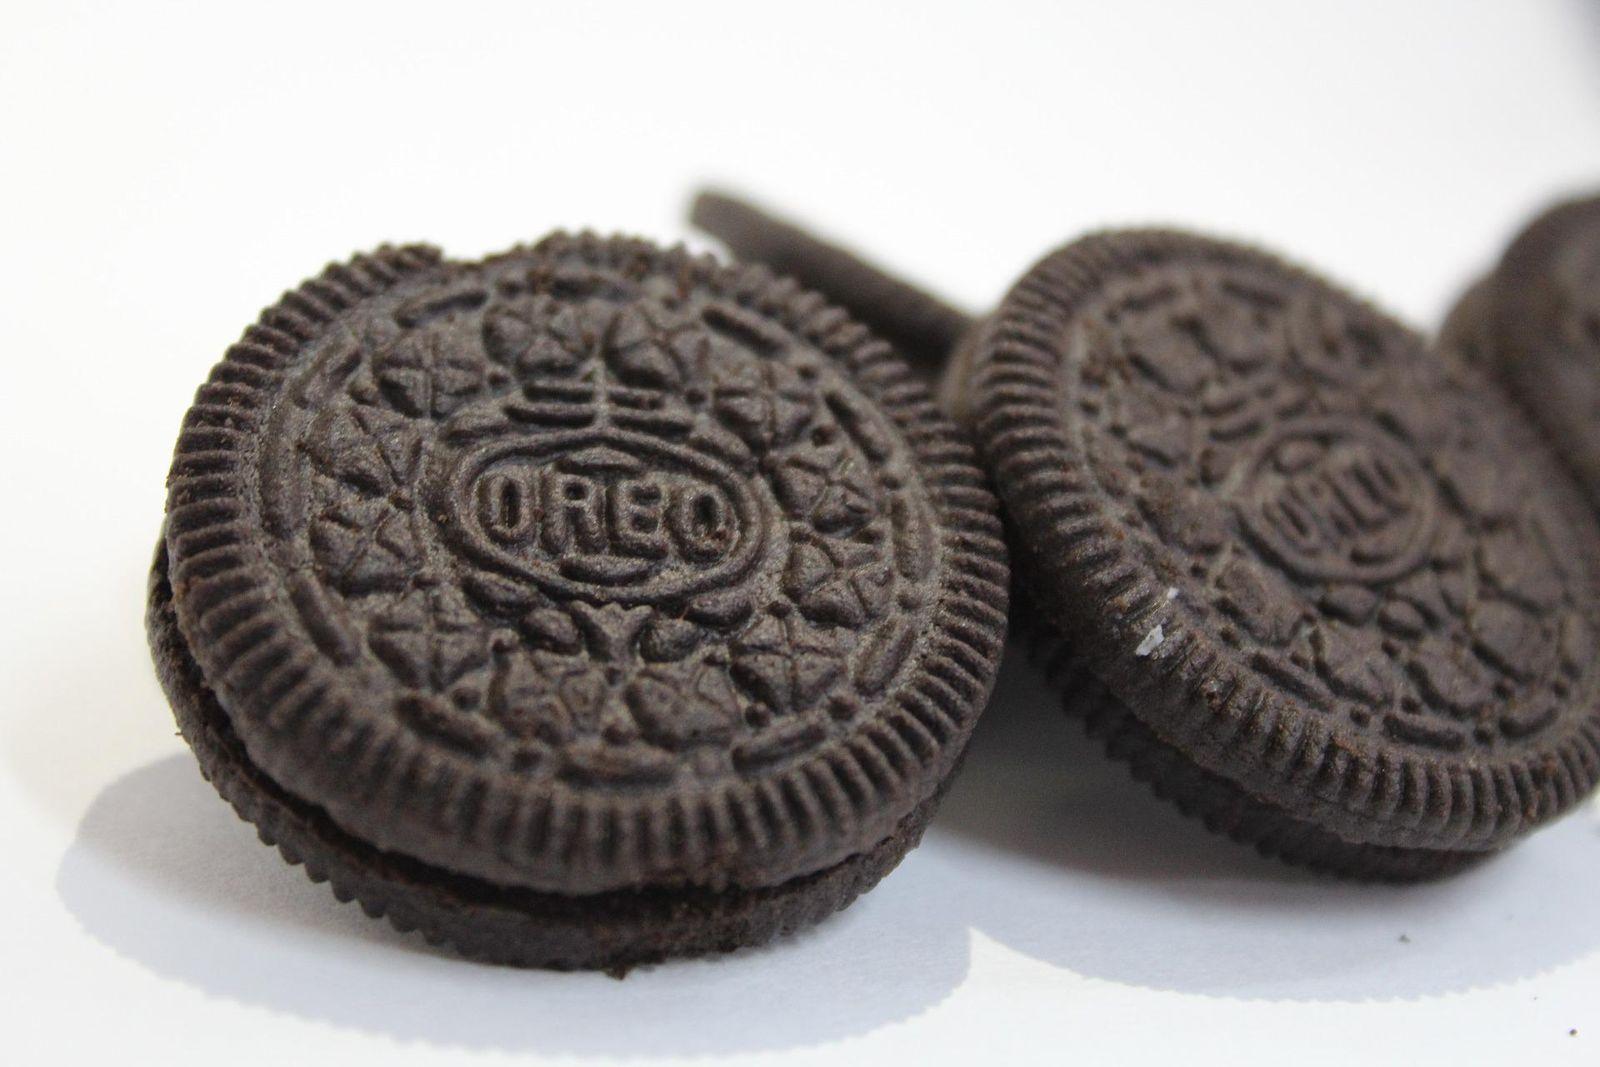 Who Invented the Oreo?